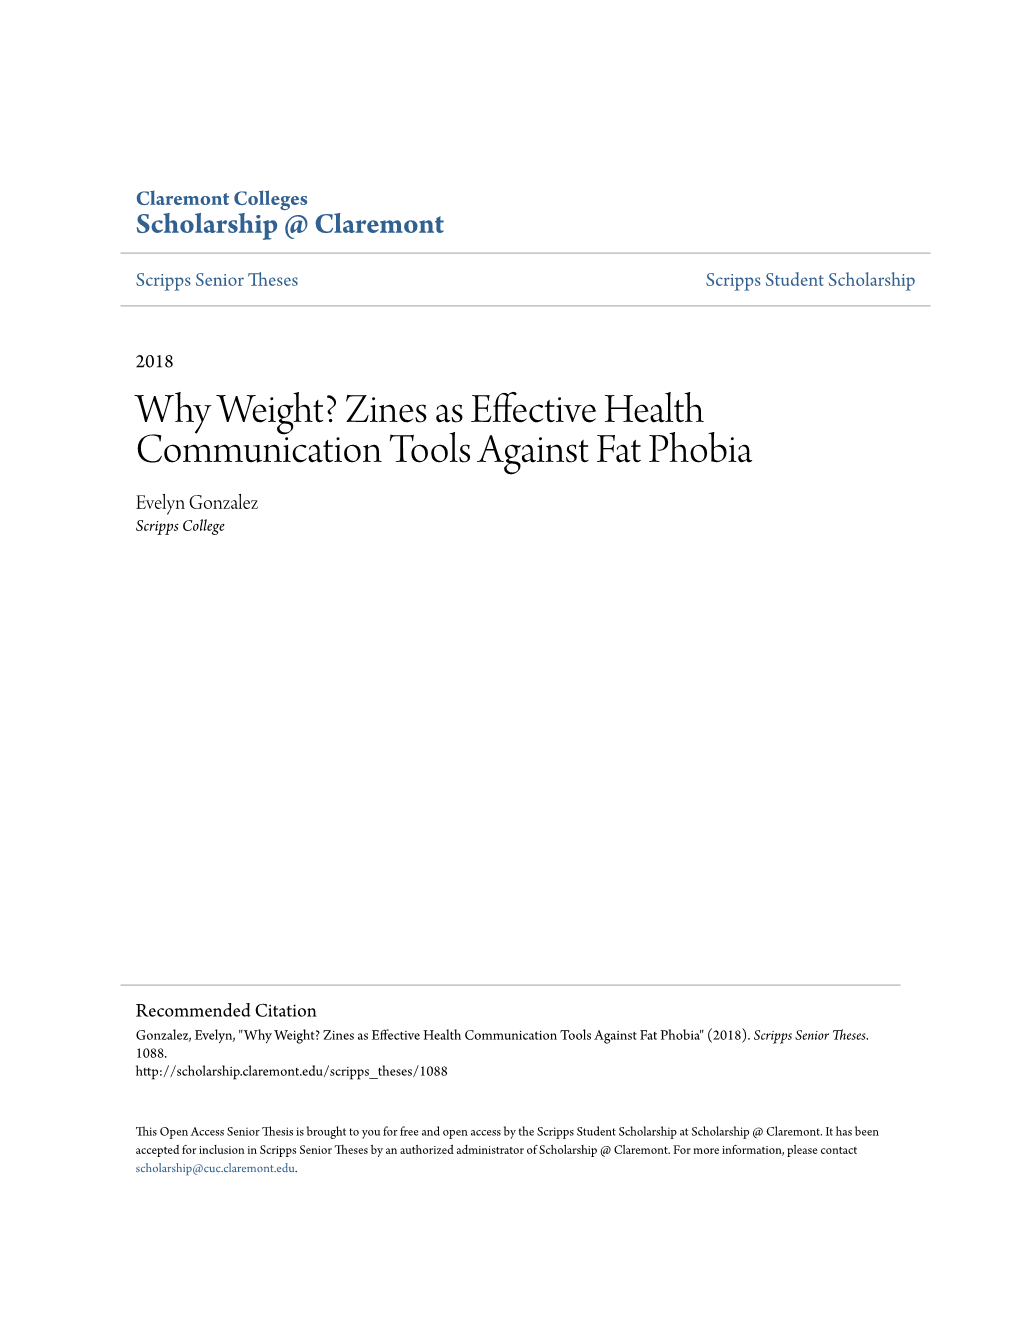 Why Weight? Zines As Effective Health Communication Tools Against Fat Phobia Evelyn Gonzalez Scripps College